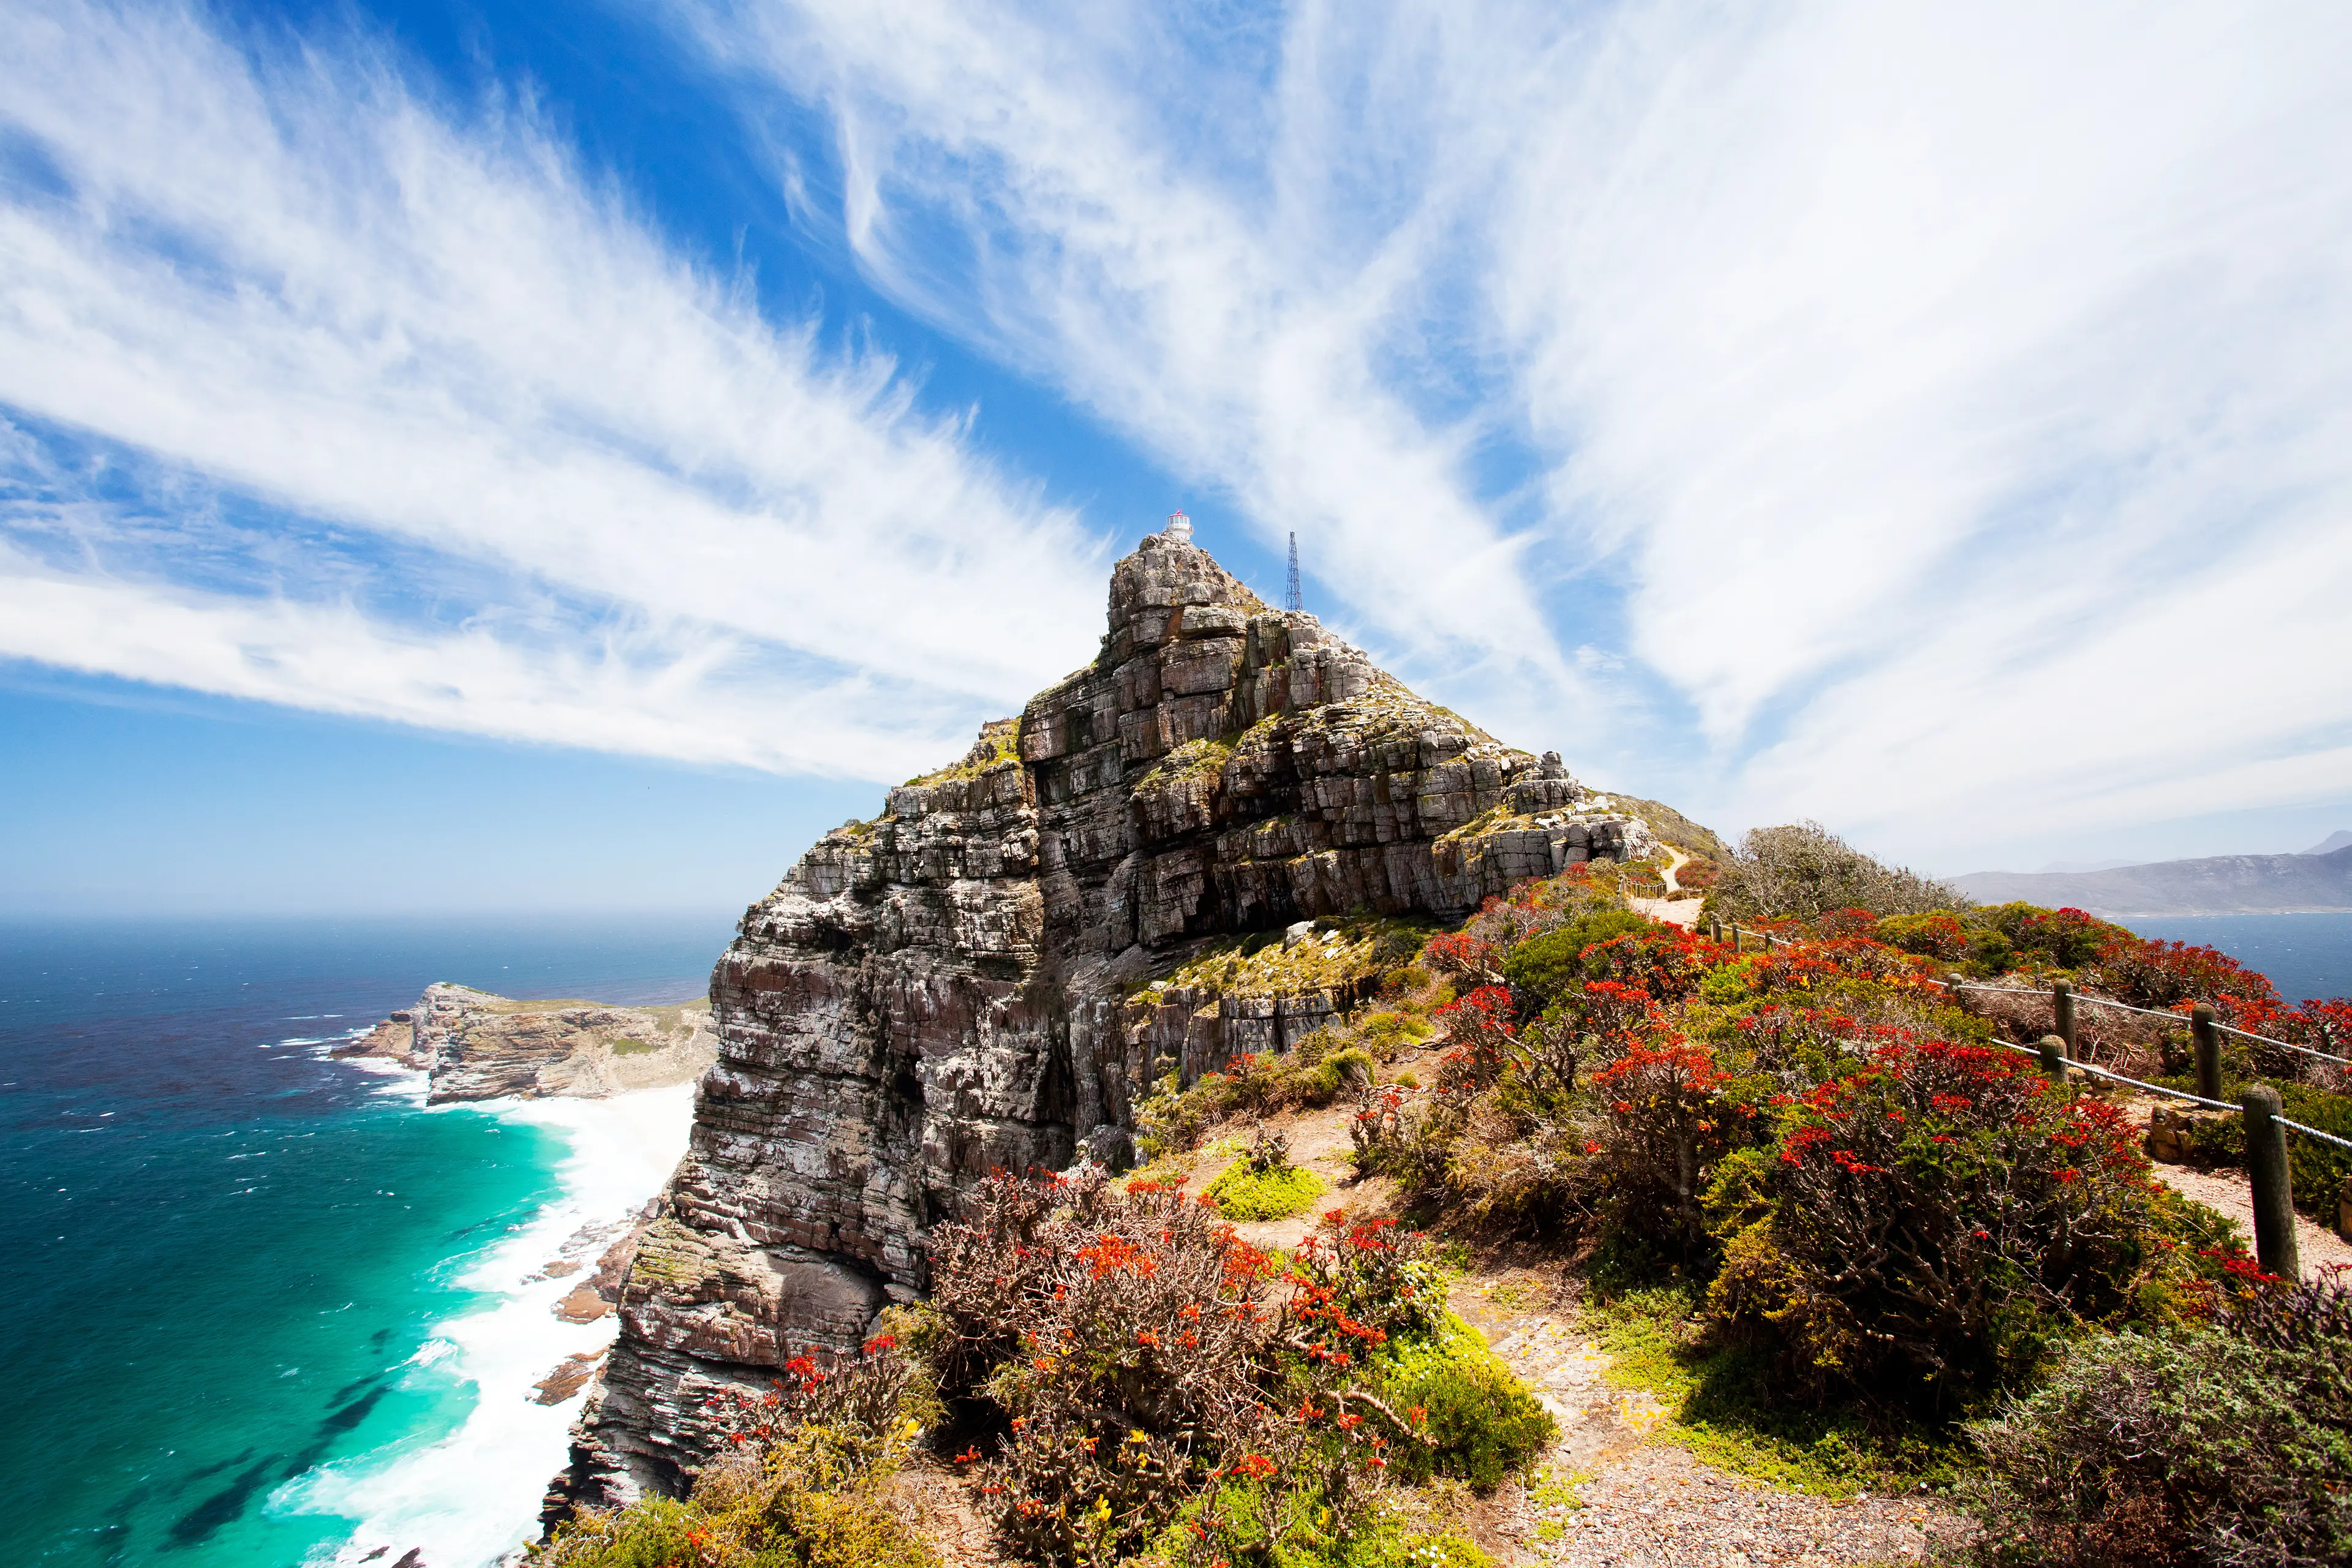 2-Day Exciting Exploration of Cape Town, South Africa